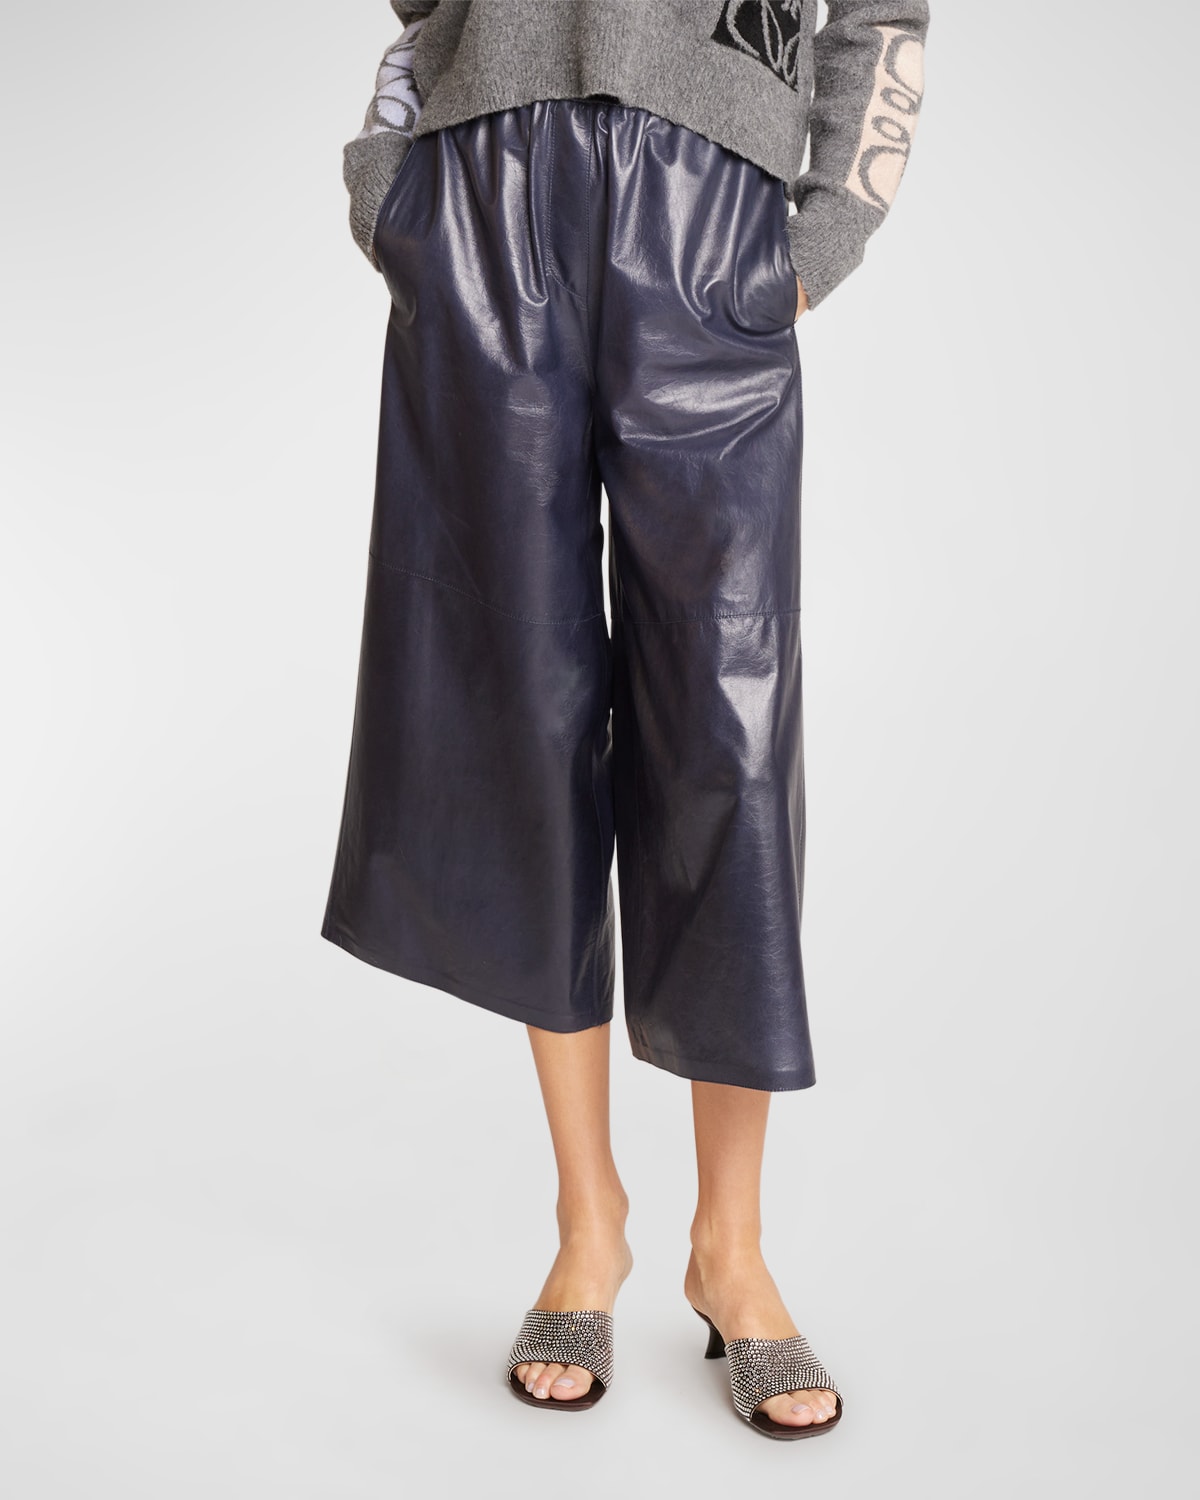 LOEWE CROPPED LEATHER TROUSERS WITH ANAGRAM DETAIL